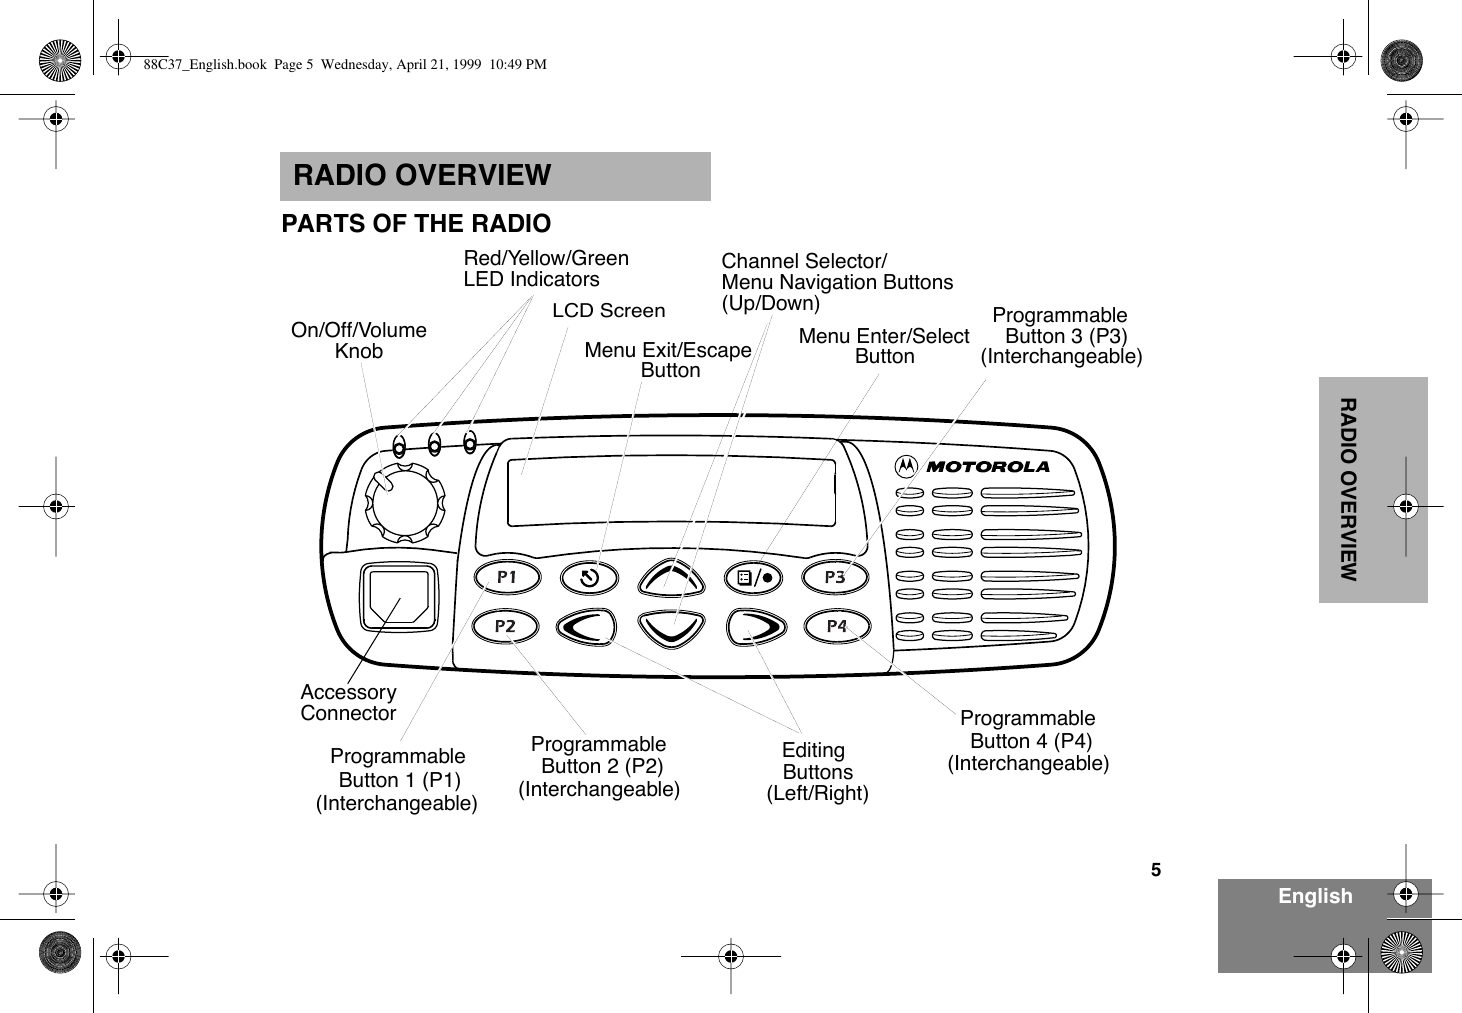  5 EnglishRADIO OVERVIEW RADIO OVERVIEW PARTS OF THE RADIOEditingButtonsMenu Enter/SelectButton(Interchangeable)ProgrammableButton 2 (P2) (Interchangeable)ProgrammableButton 4 (P4)(Interchangeable)ProgrammableButton 3 (P3)LCD ScreenRed/Yellow/GreenLED IndicatorsMenu Exit/EscapeButton(Interchangeable)ProgrammableButton 1 (P1) (Left/Right)AccessoryConnectorKnobOn/Off/VolumeChannel Selector/Menu Navigation Buttons(Up/Down) 88C37_English.book  Page 5  Wednesday, April 21, 1999  10:49 PM